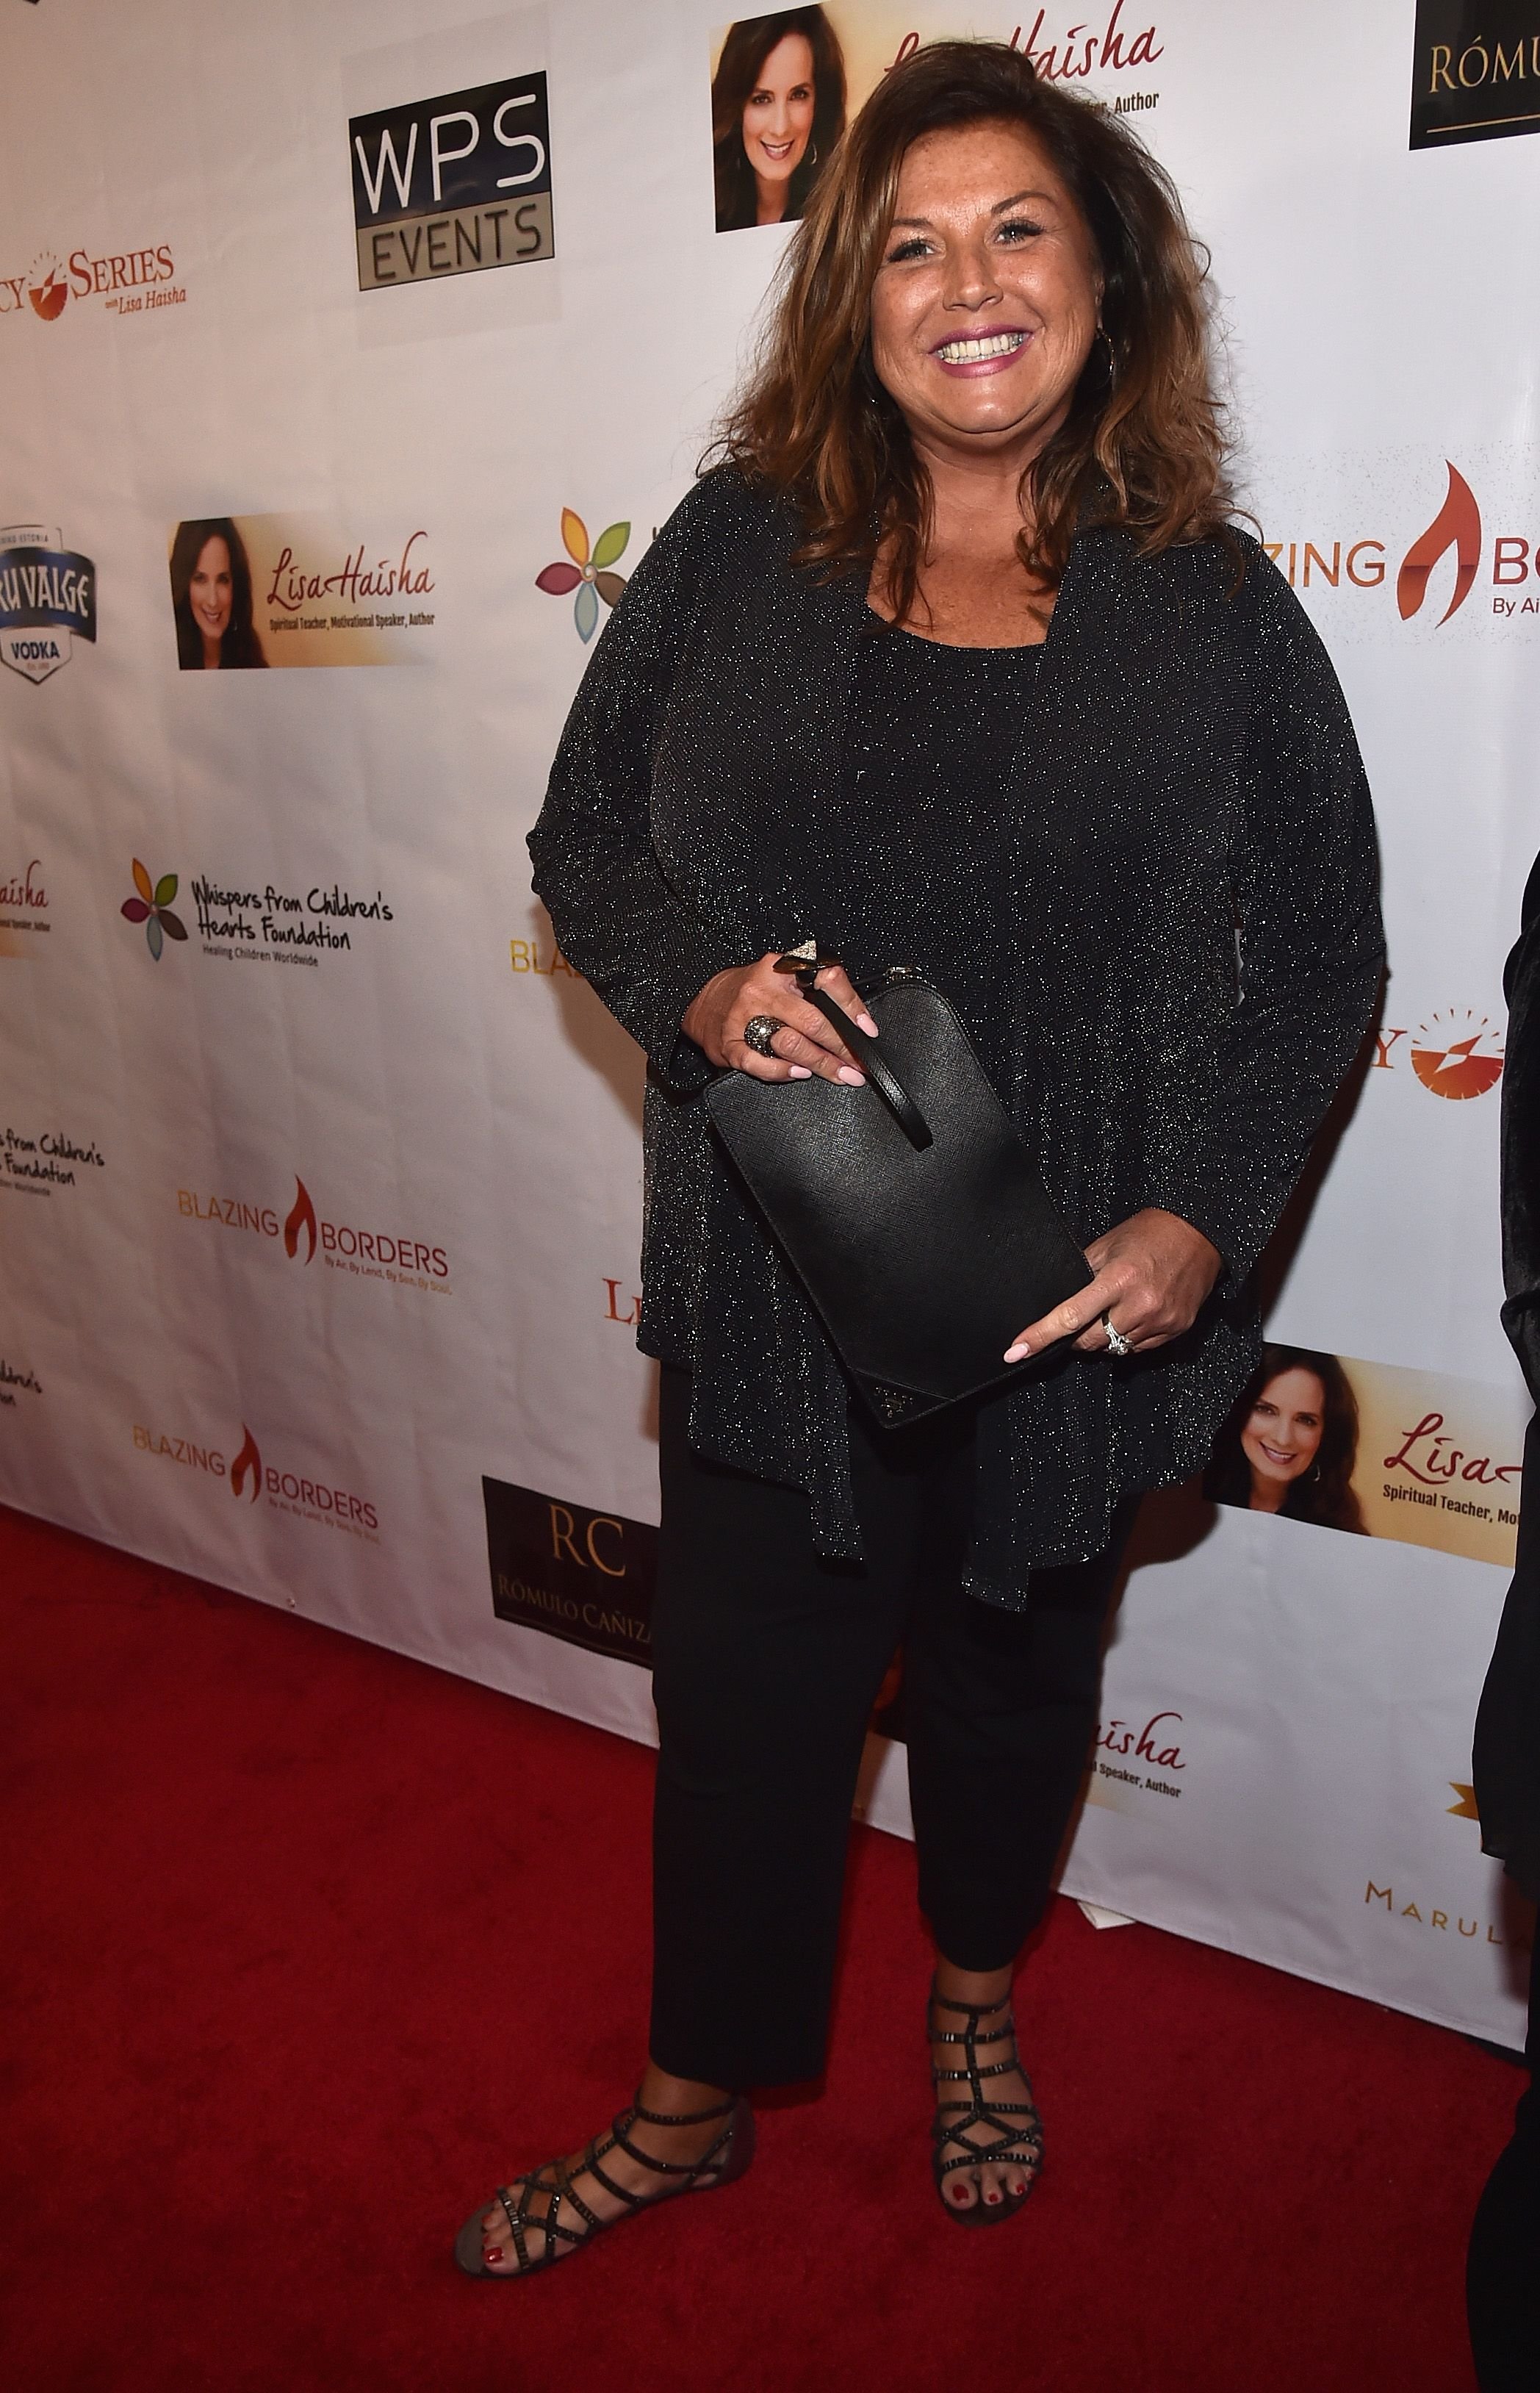 Abby Lee Miller at the 3rd Annual Whispers From Children's Hearts Foundation in 2017 in Santa Monica | Source: Getty Images